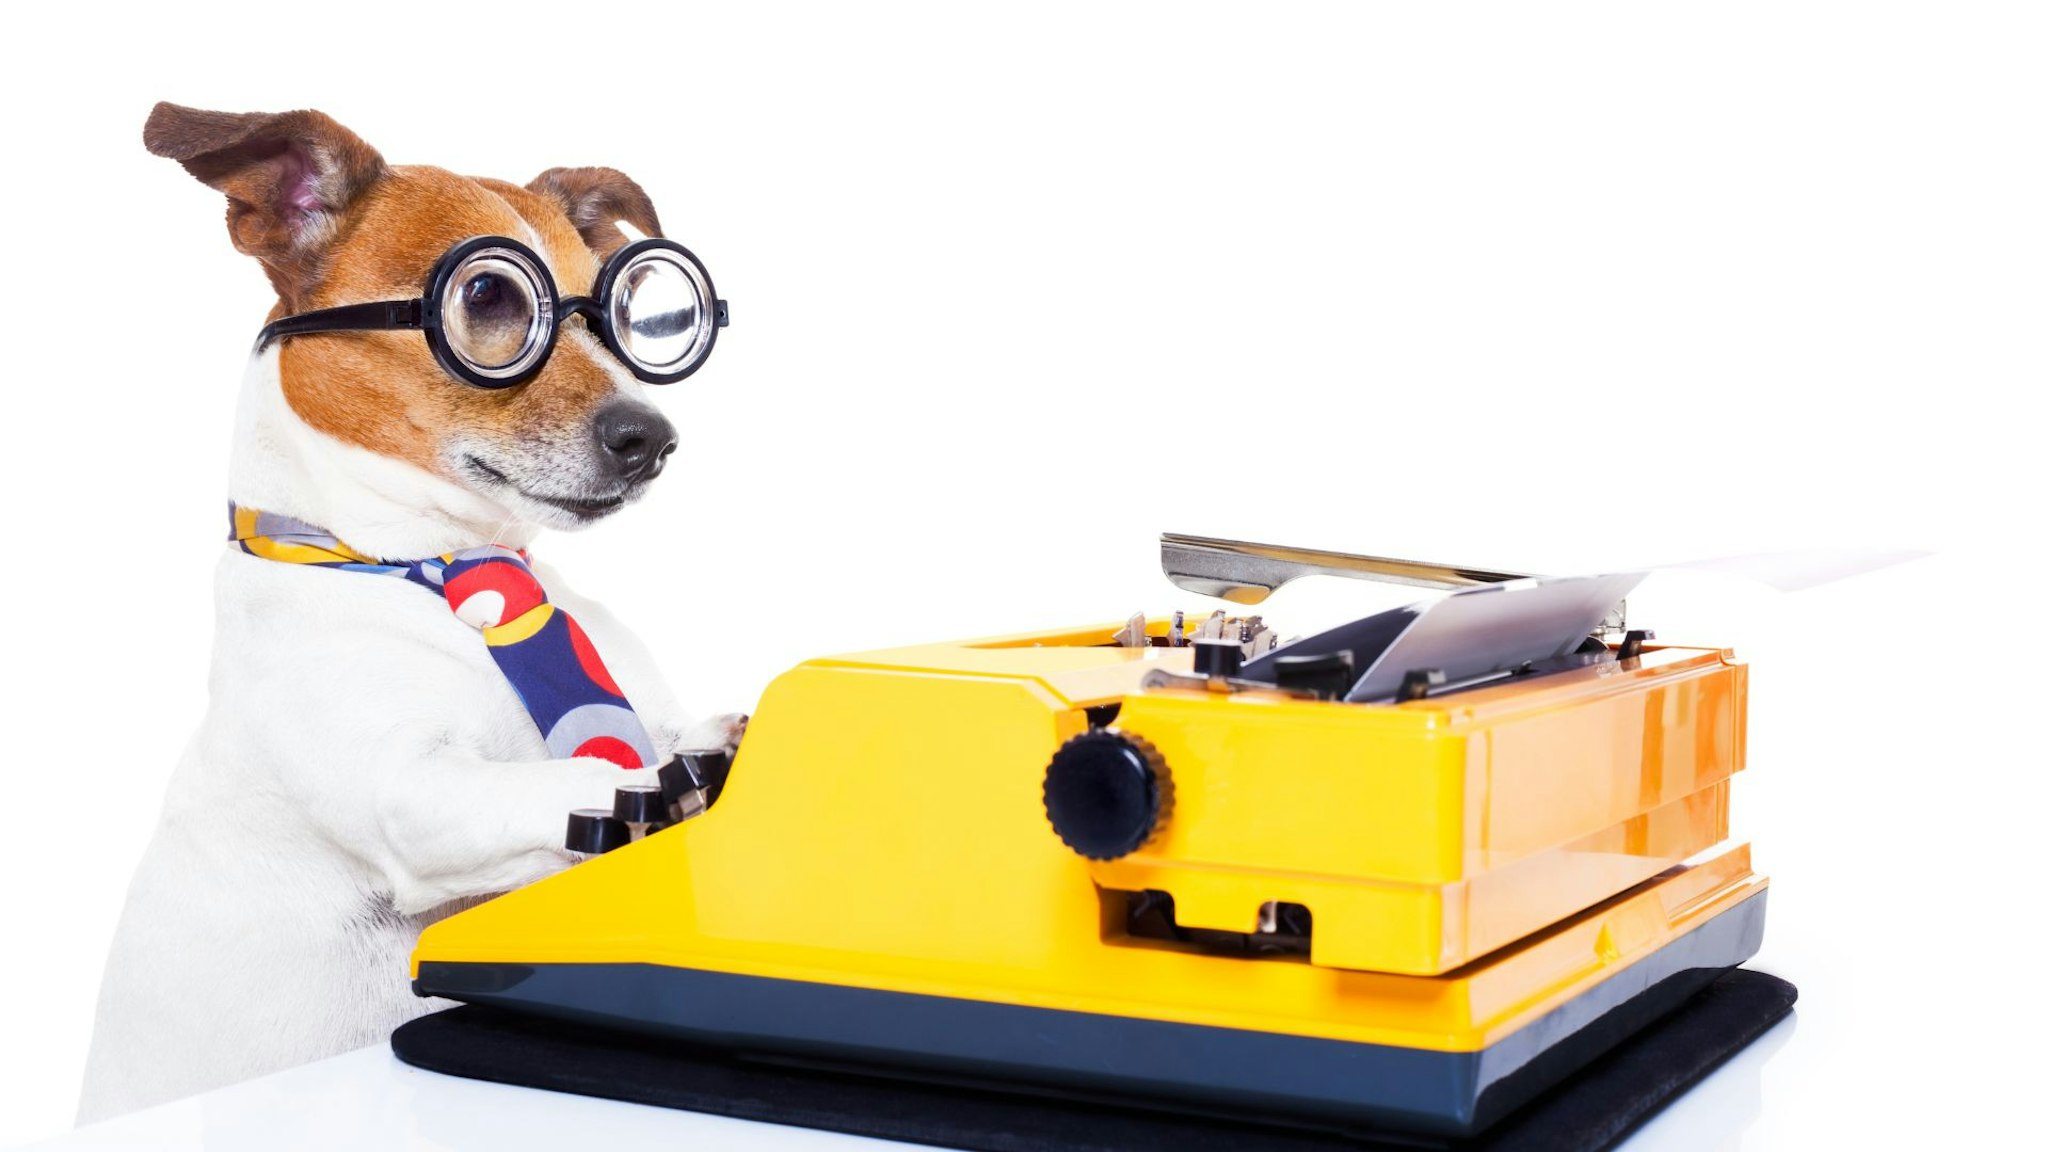 Stock photo of dog at typewriter via Getty Images